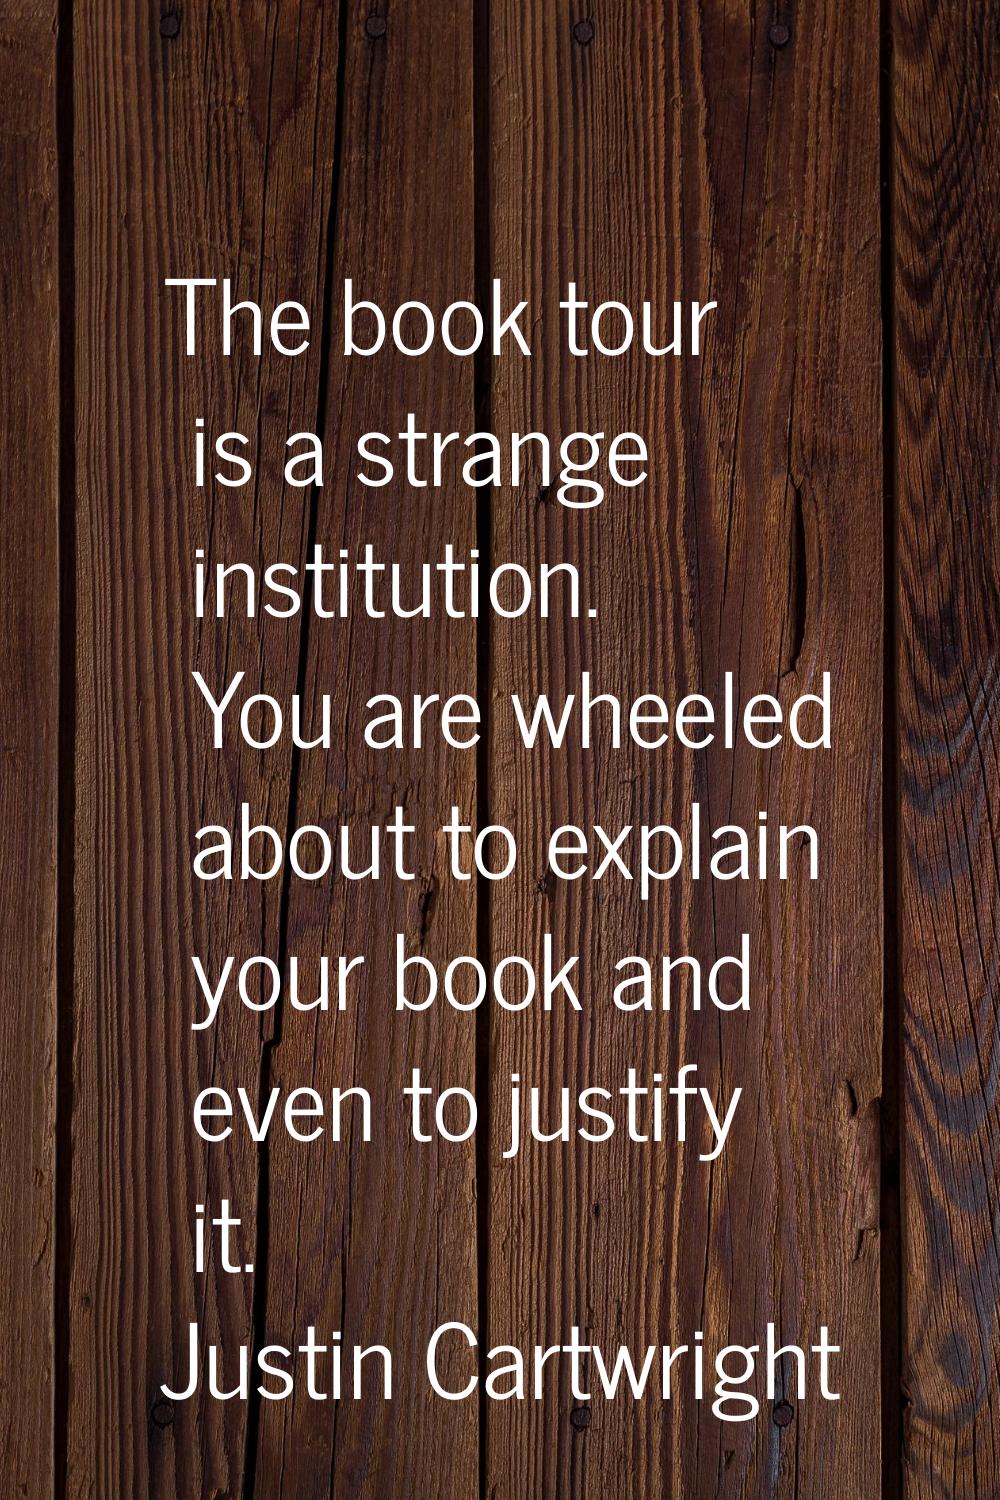 The book tour is a strange institution. You are wheeled about to explain your book and even to just